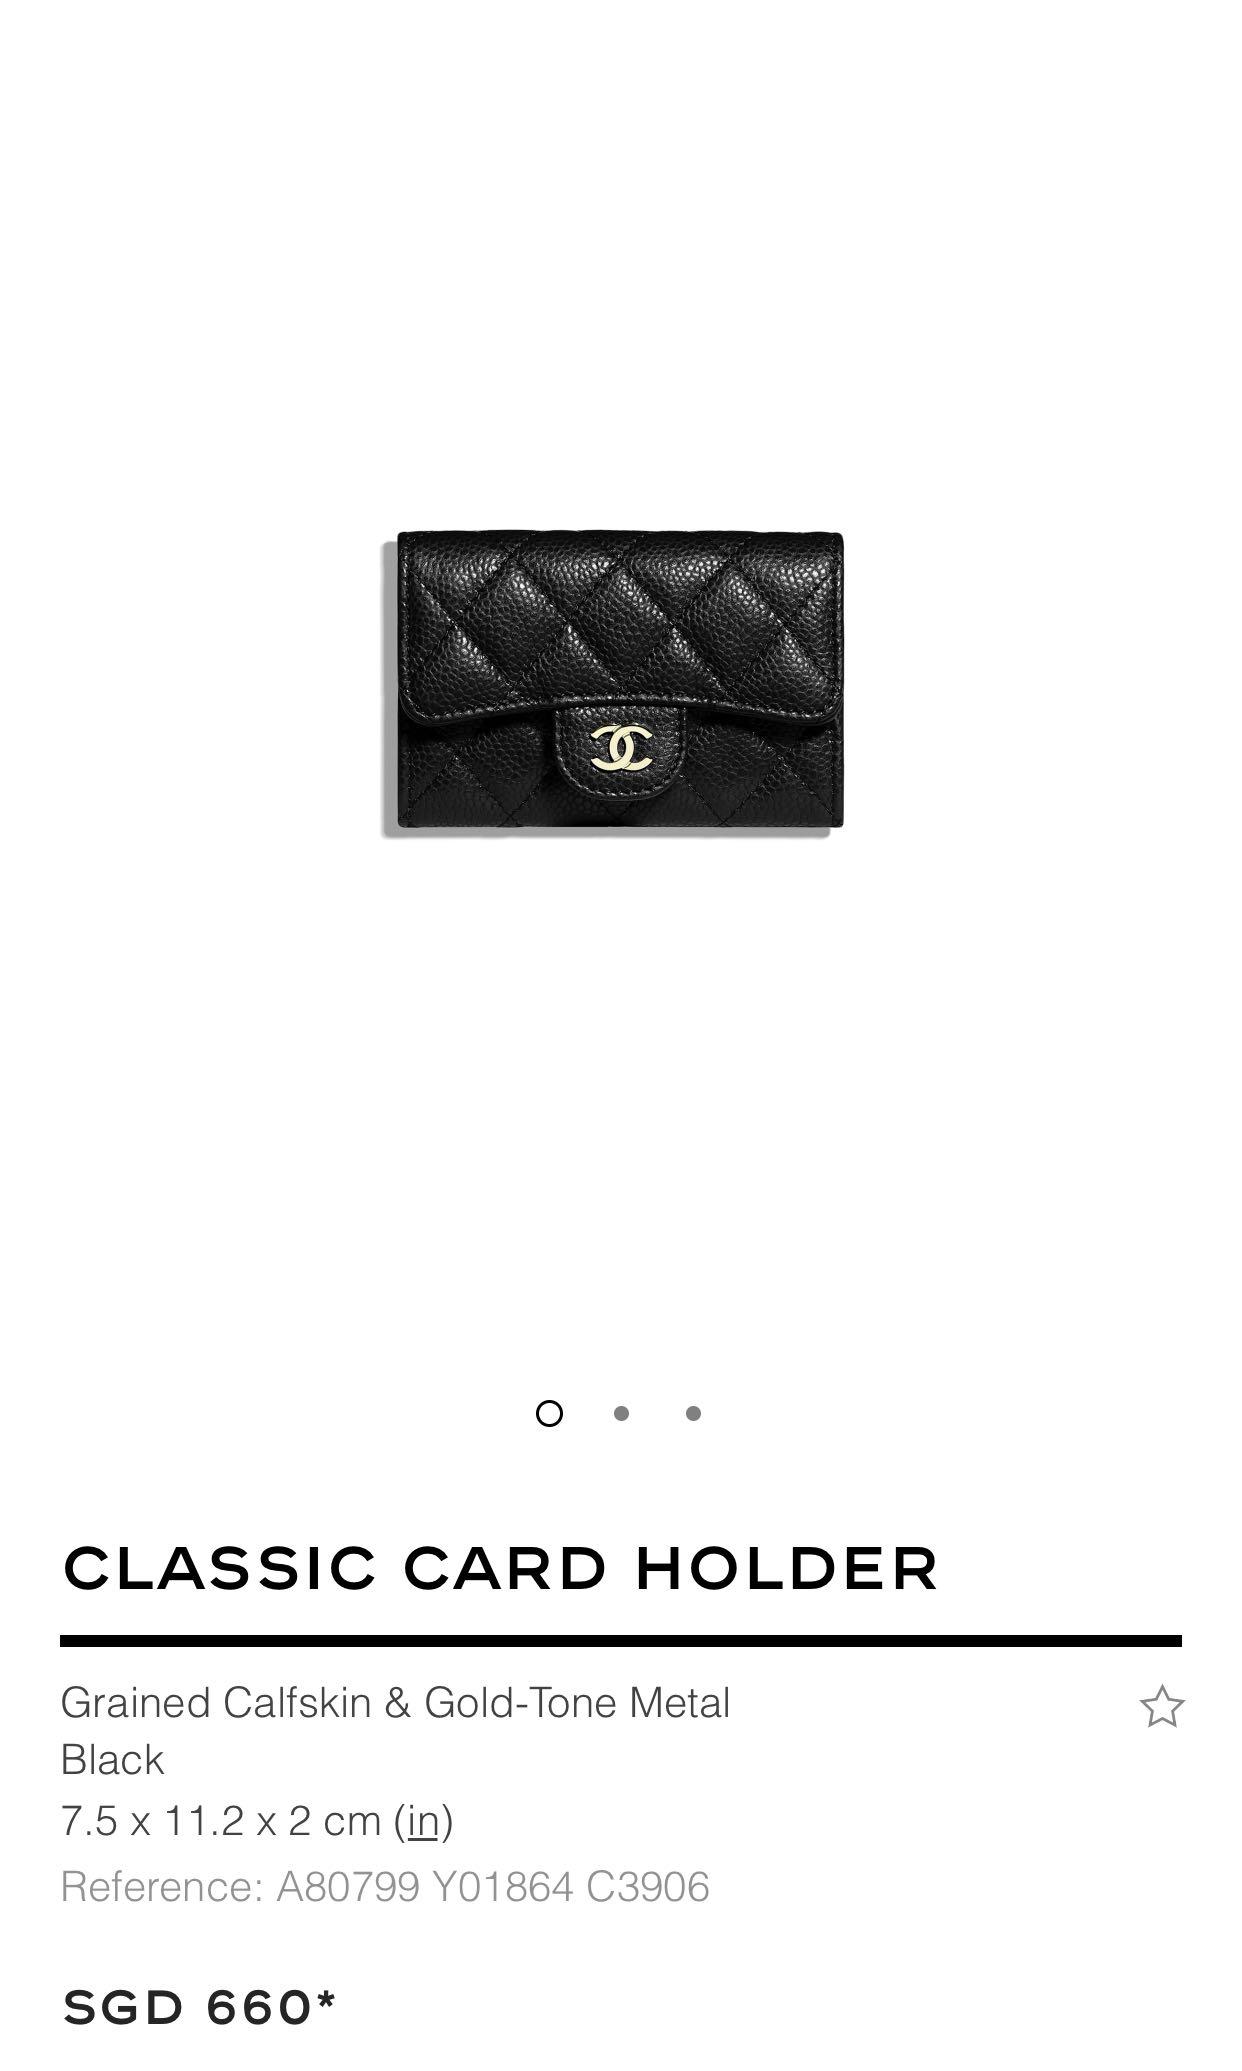 Chanel card holder. The bag is awesome. ✨, Gallery posted by Peanut